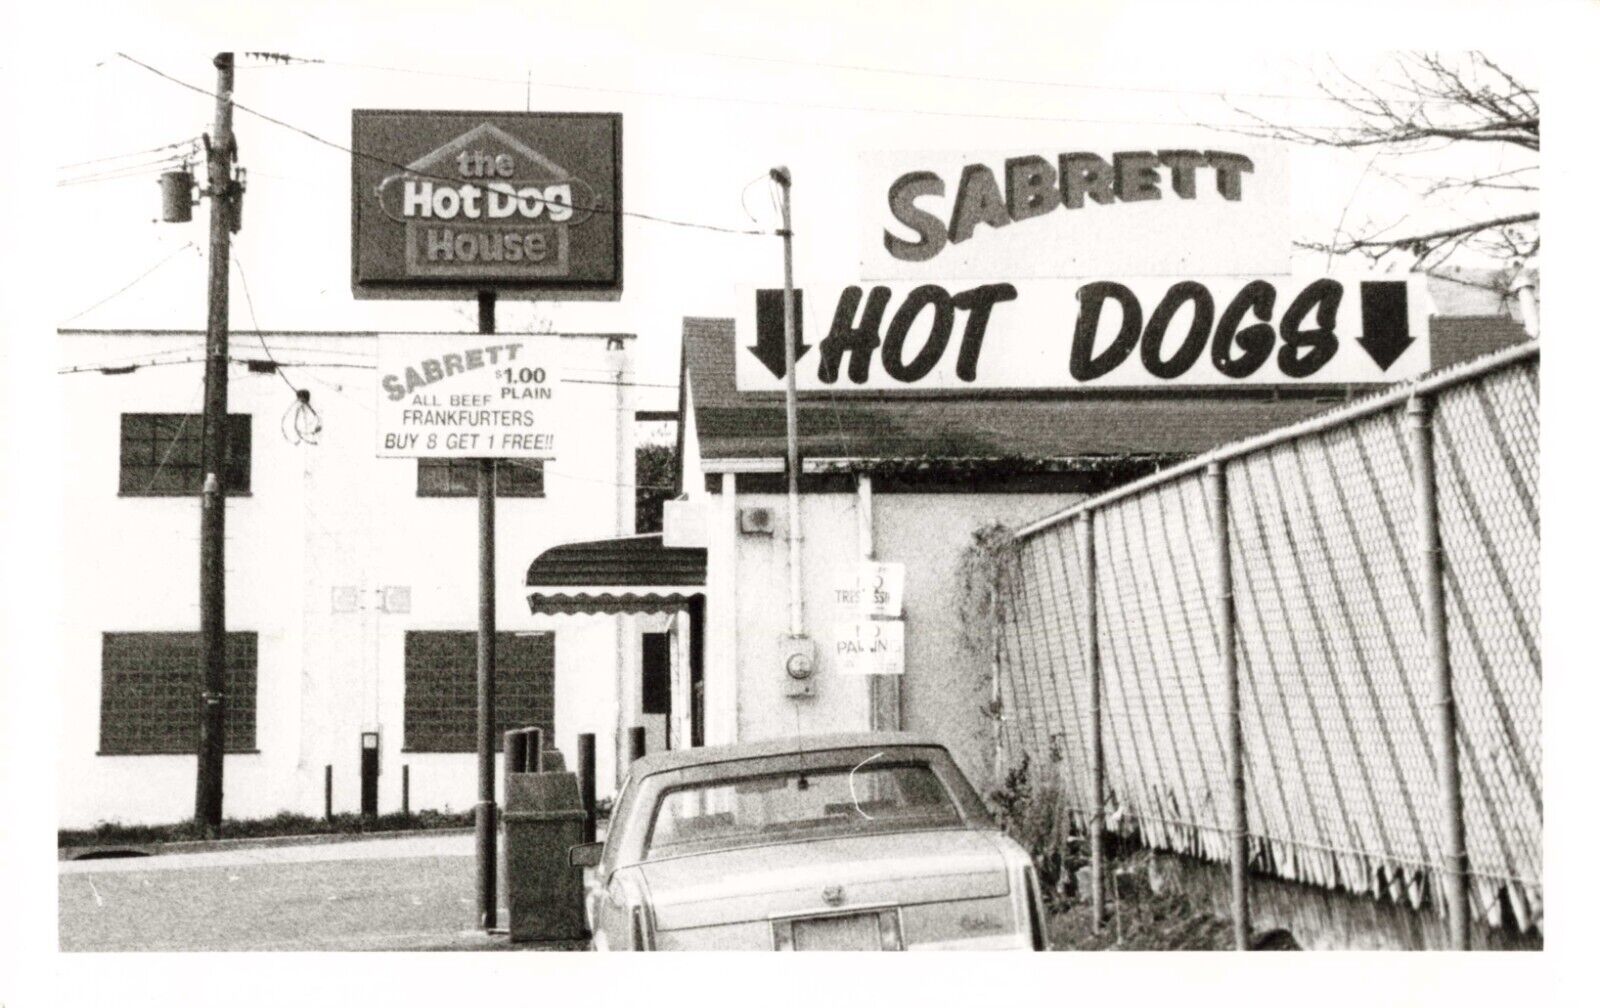 Sabrett Hot Dog House Rte 17 East Rutherford New Jersey NJ 1994 Real Photo RPPC